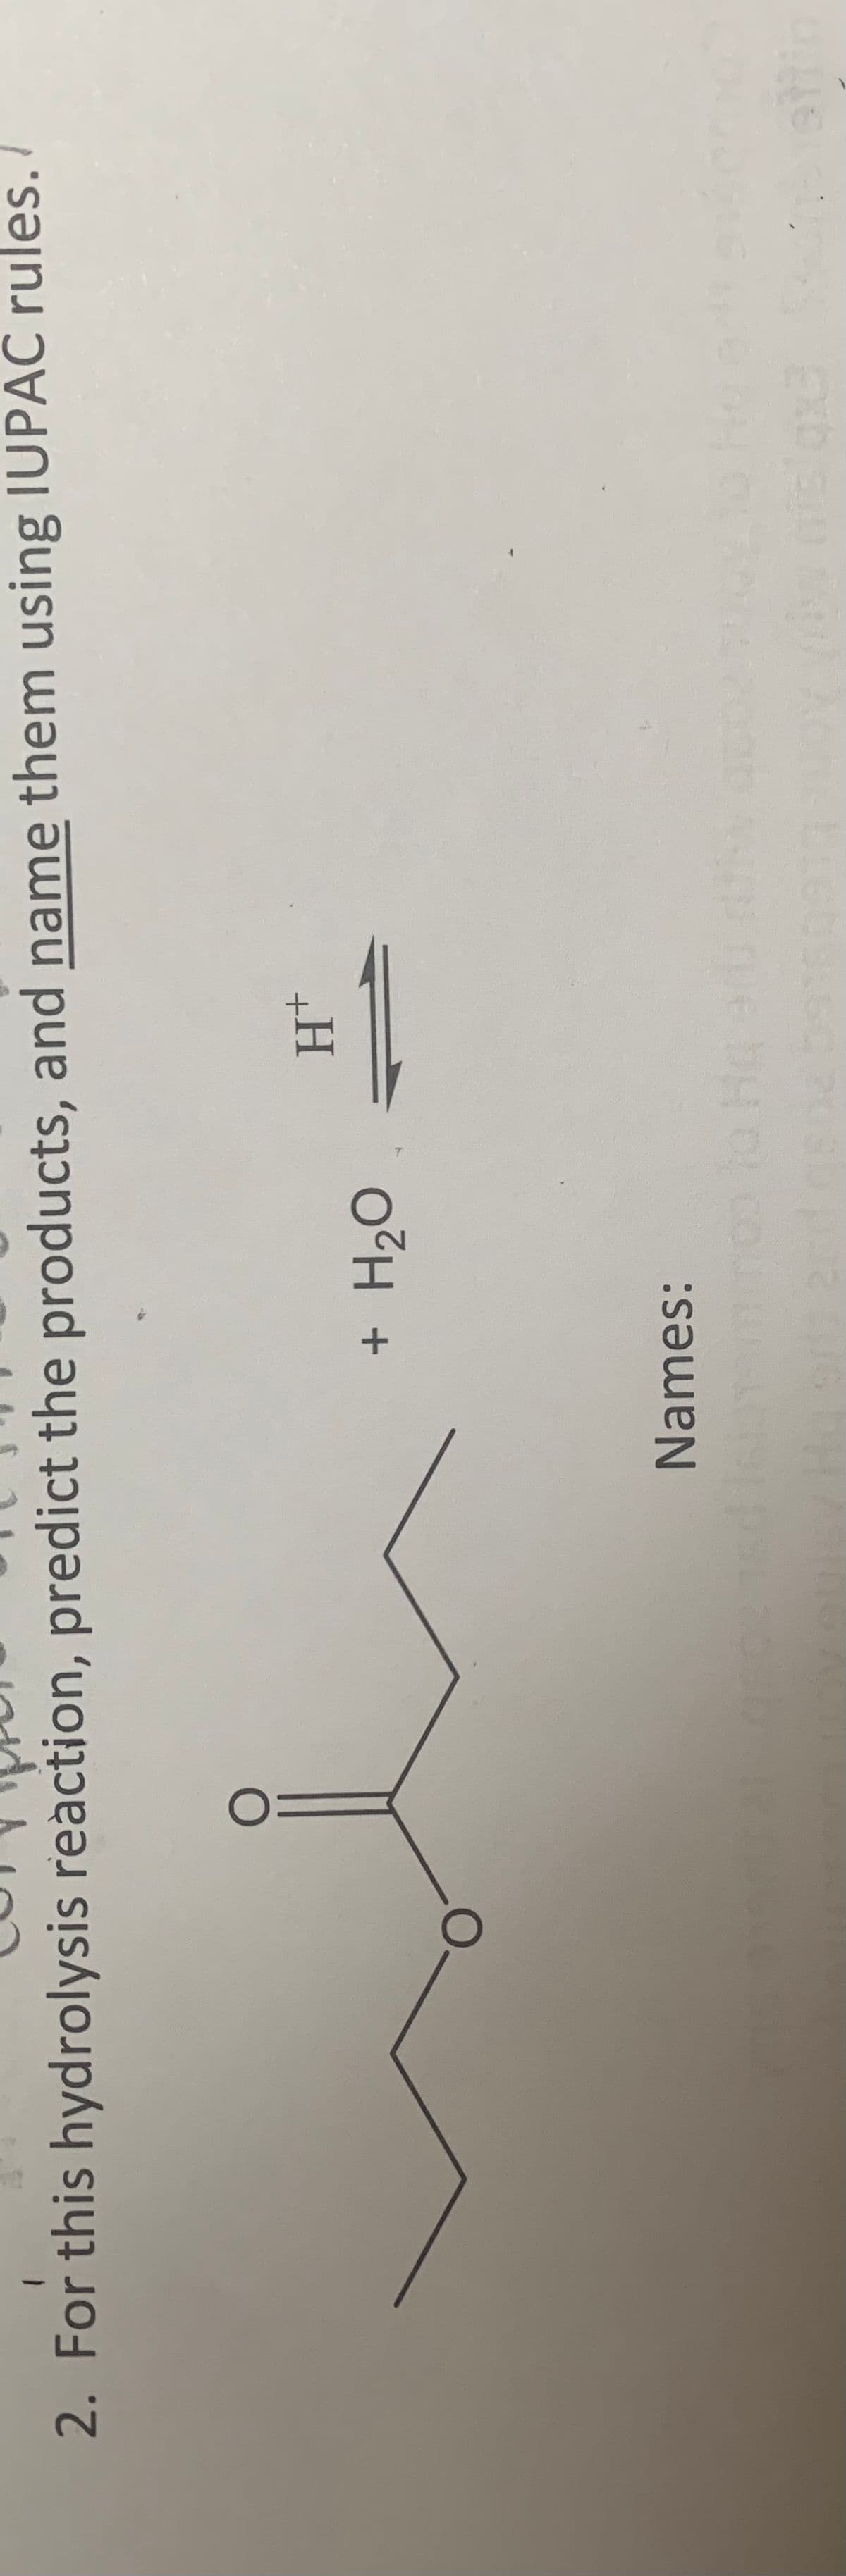 1
2. For this hydrolysis reaction, predict the products, and name them using IUPAC rules.
+ H₂O
Names:
to
H+